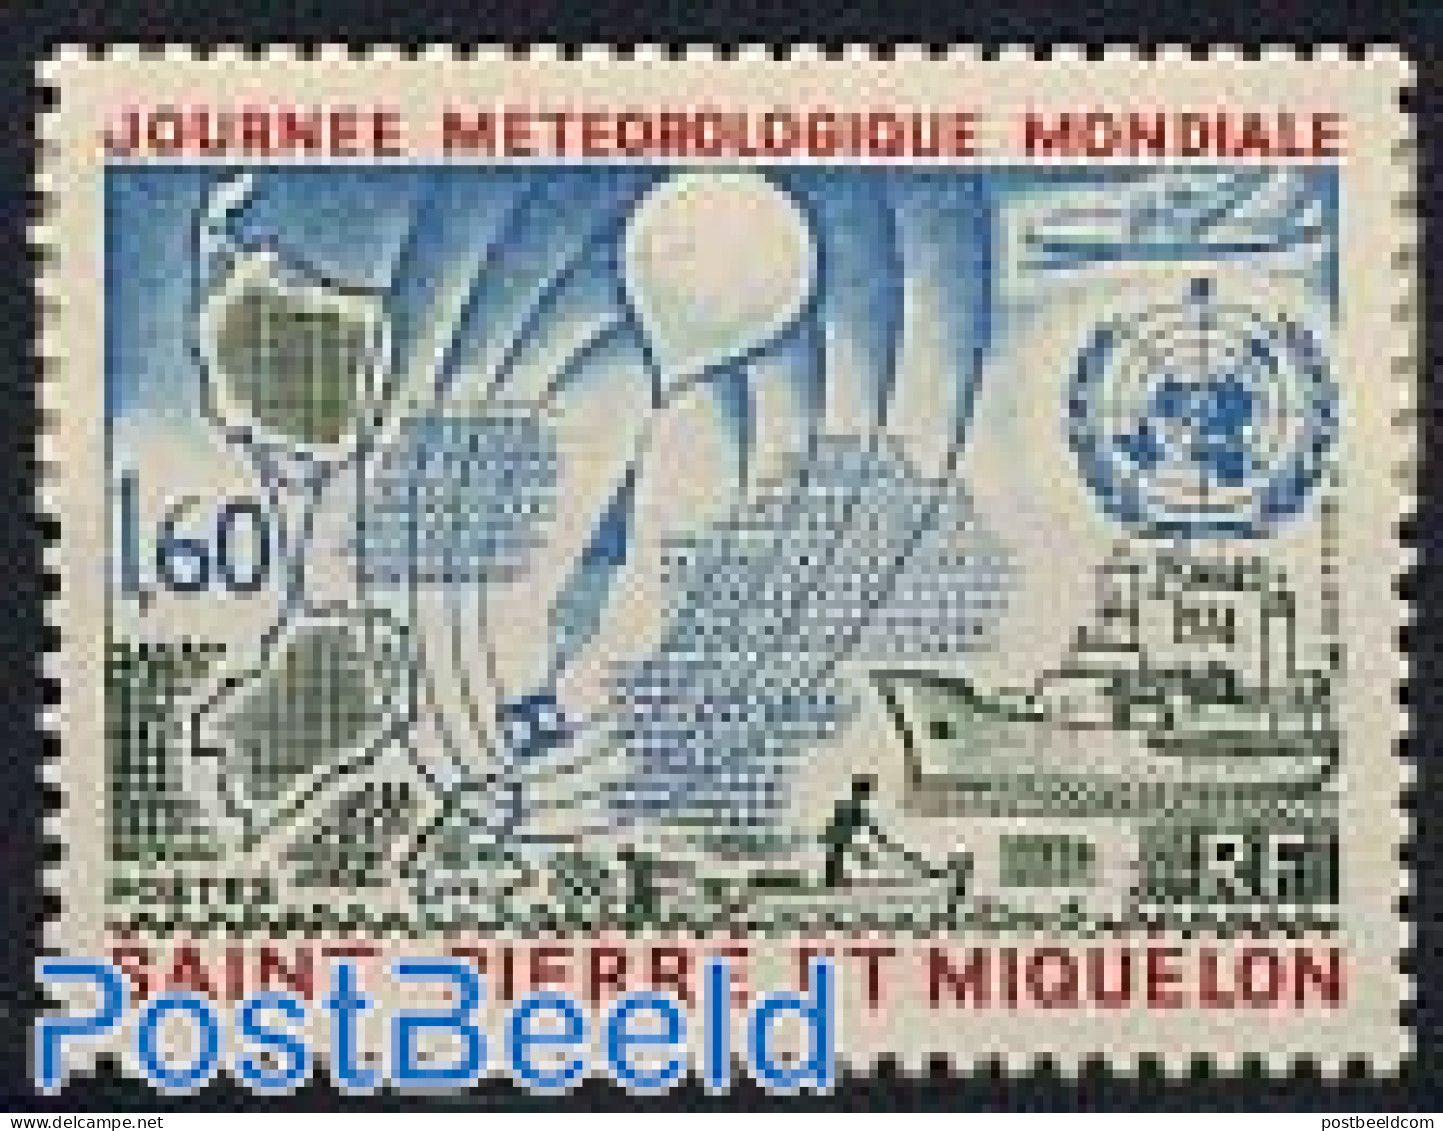 Saint Pierre And Miquelon 1974 Meteorology Day 1v, Mint NH, Science - Transport - Meteorology - Aircraft & Aviation - .. - Klima & Meteorologie